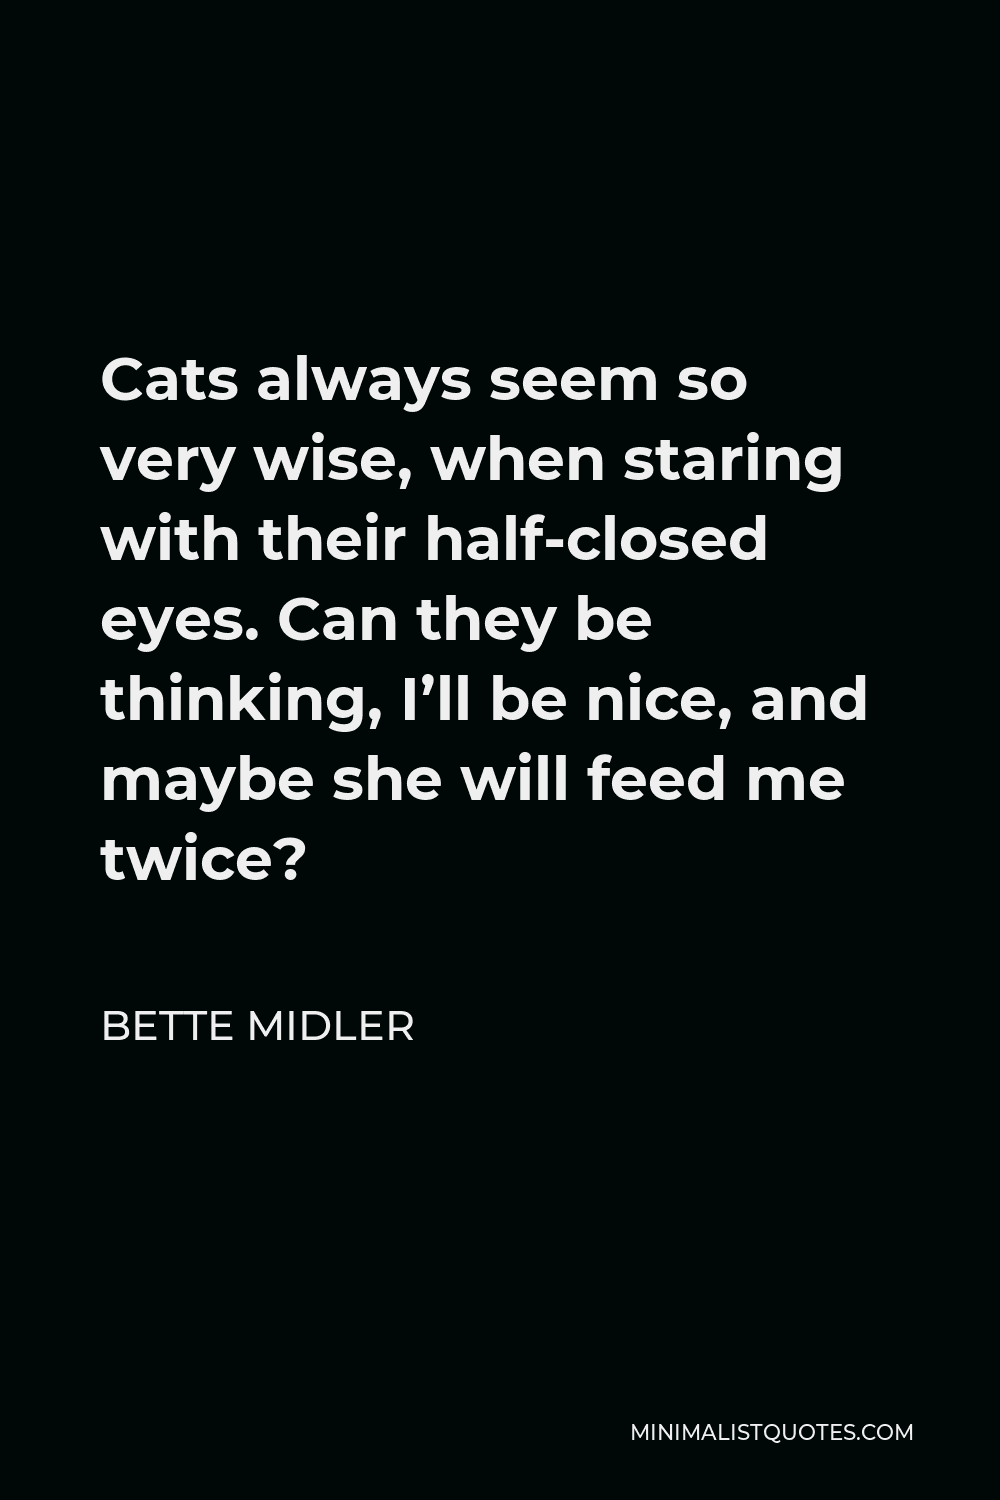 Bette Midler Quote - Cats always seem so very wise, when staring with their half-closed eyes. Can they be thinking, I’ll be nice, and maybe she will feed me twice?